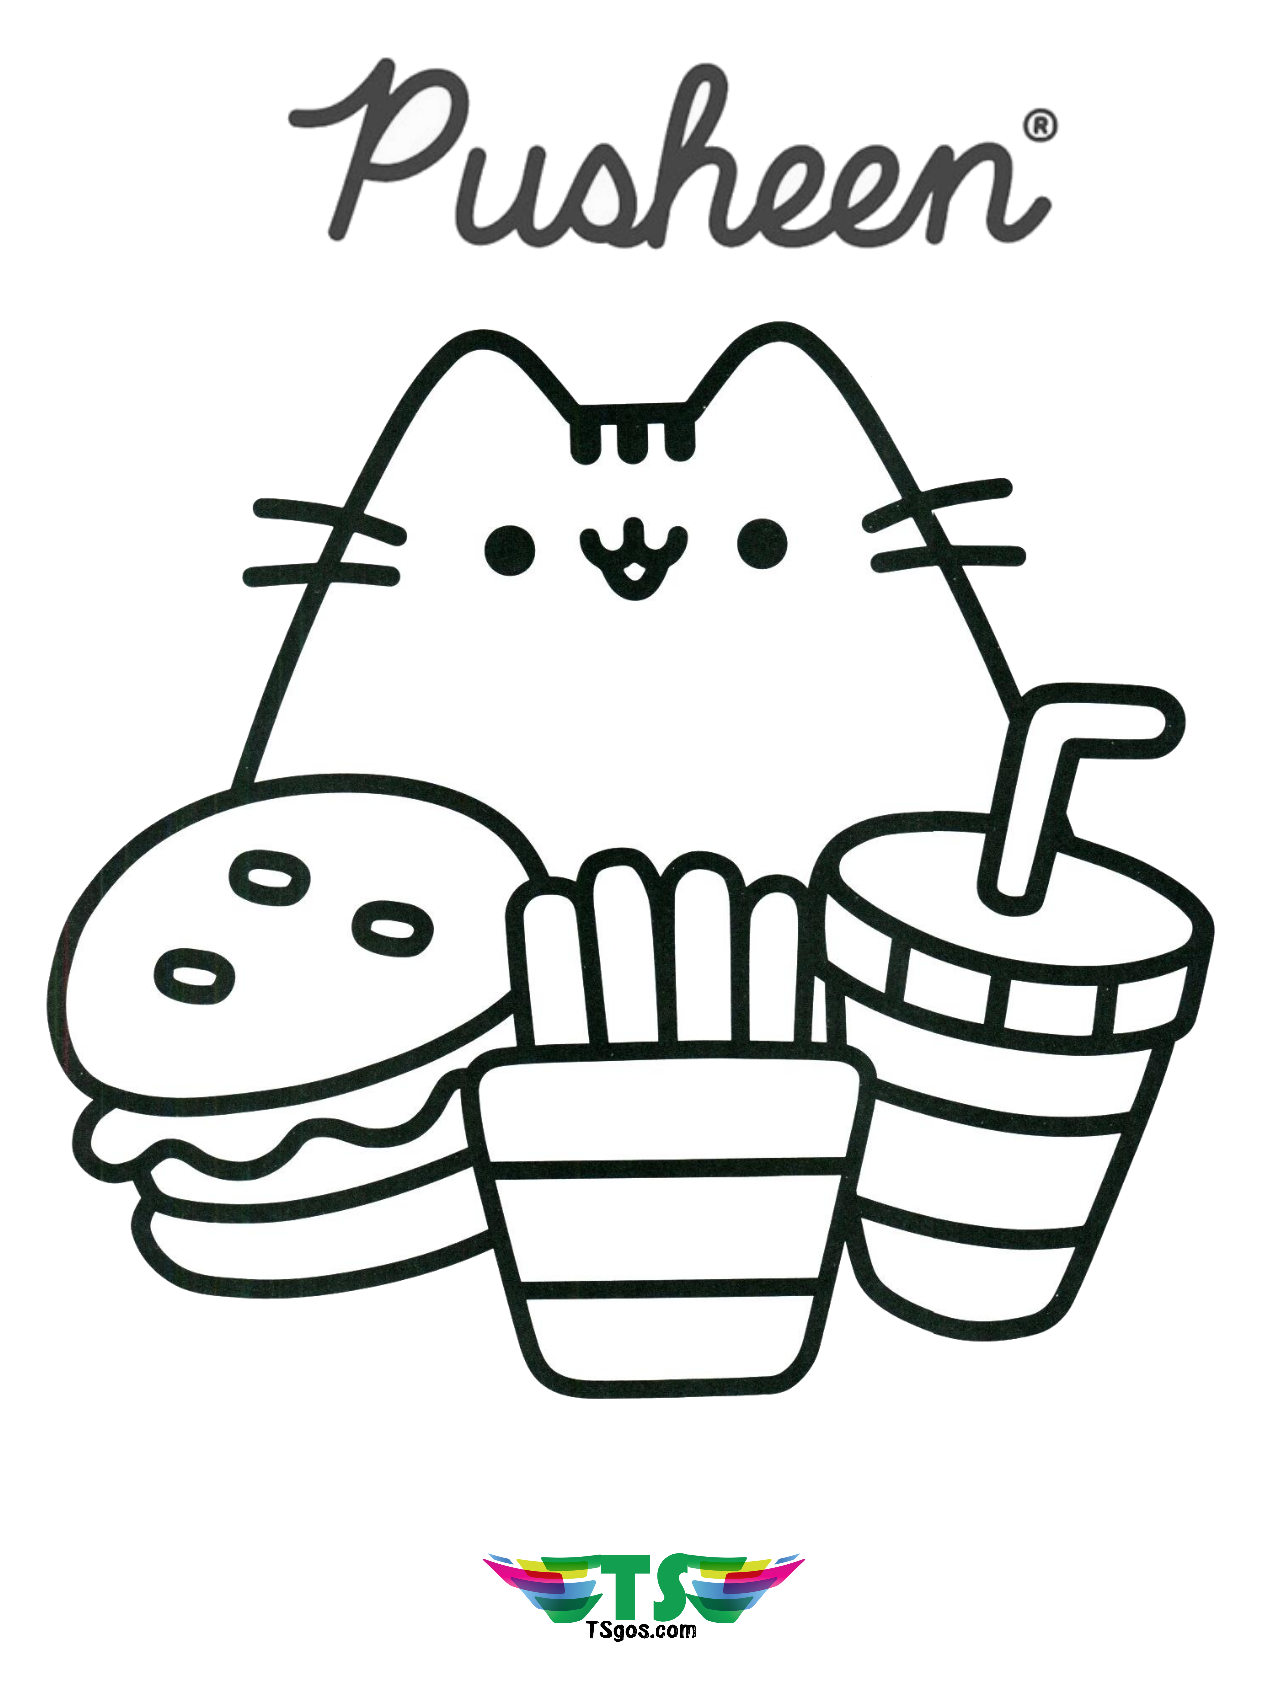 Free download Pusheen the cat coloring page.